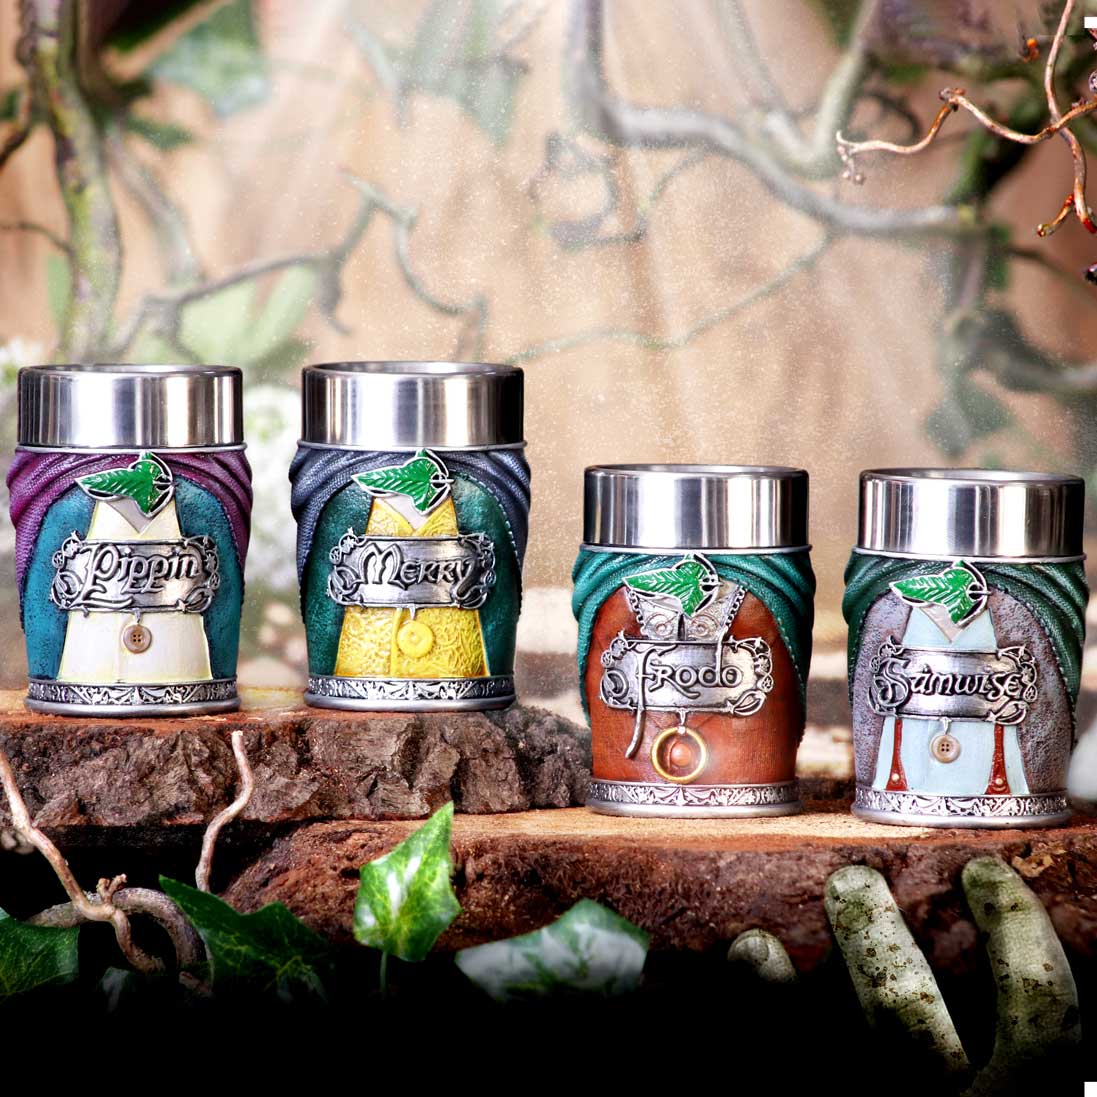 Officially Licensed Lord of the Rings Hobbit Shot Glass Set Homeware 2